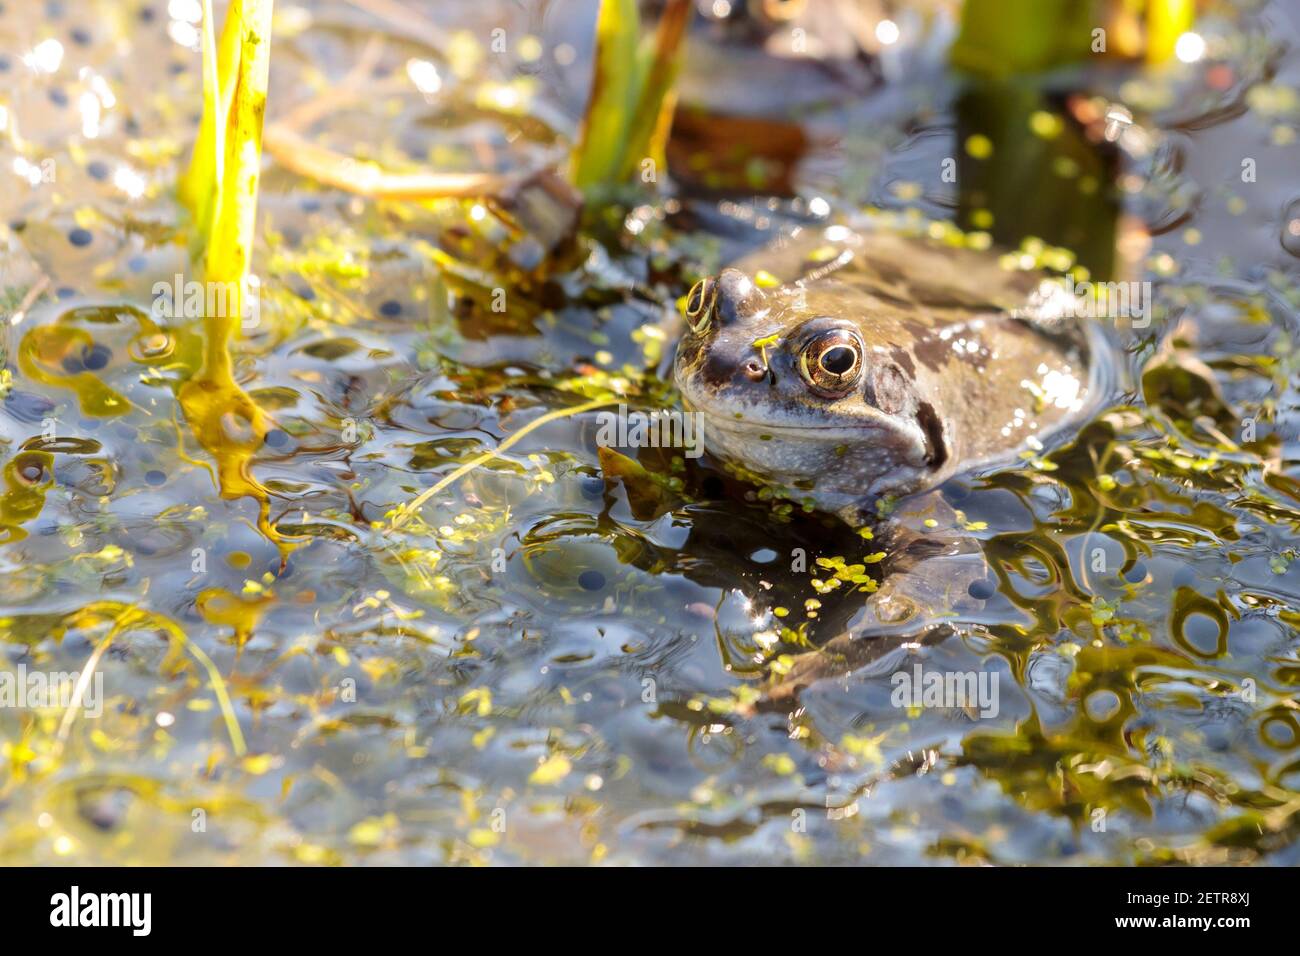 Common frog (Rana temporaria) floating in a garden pond and surrounded by frogspawn, Sussex,England, UK Stock Photo